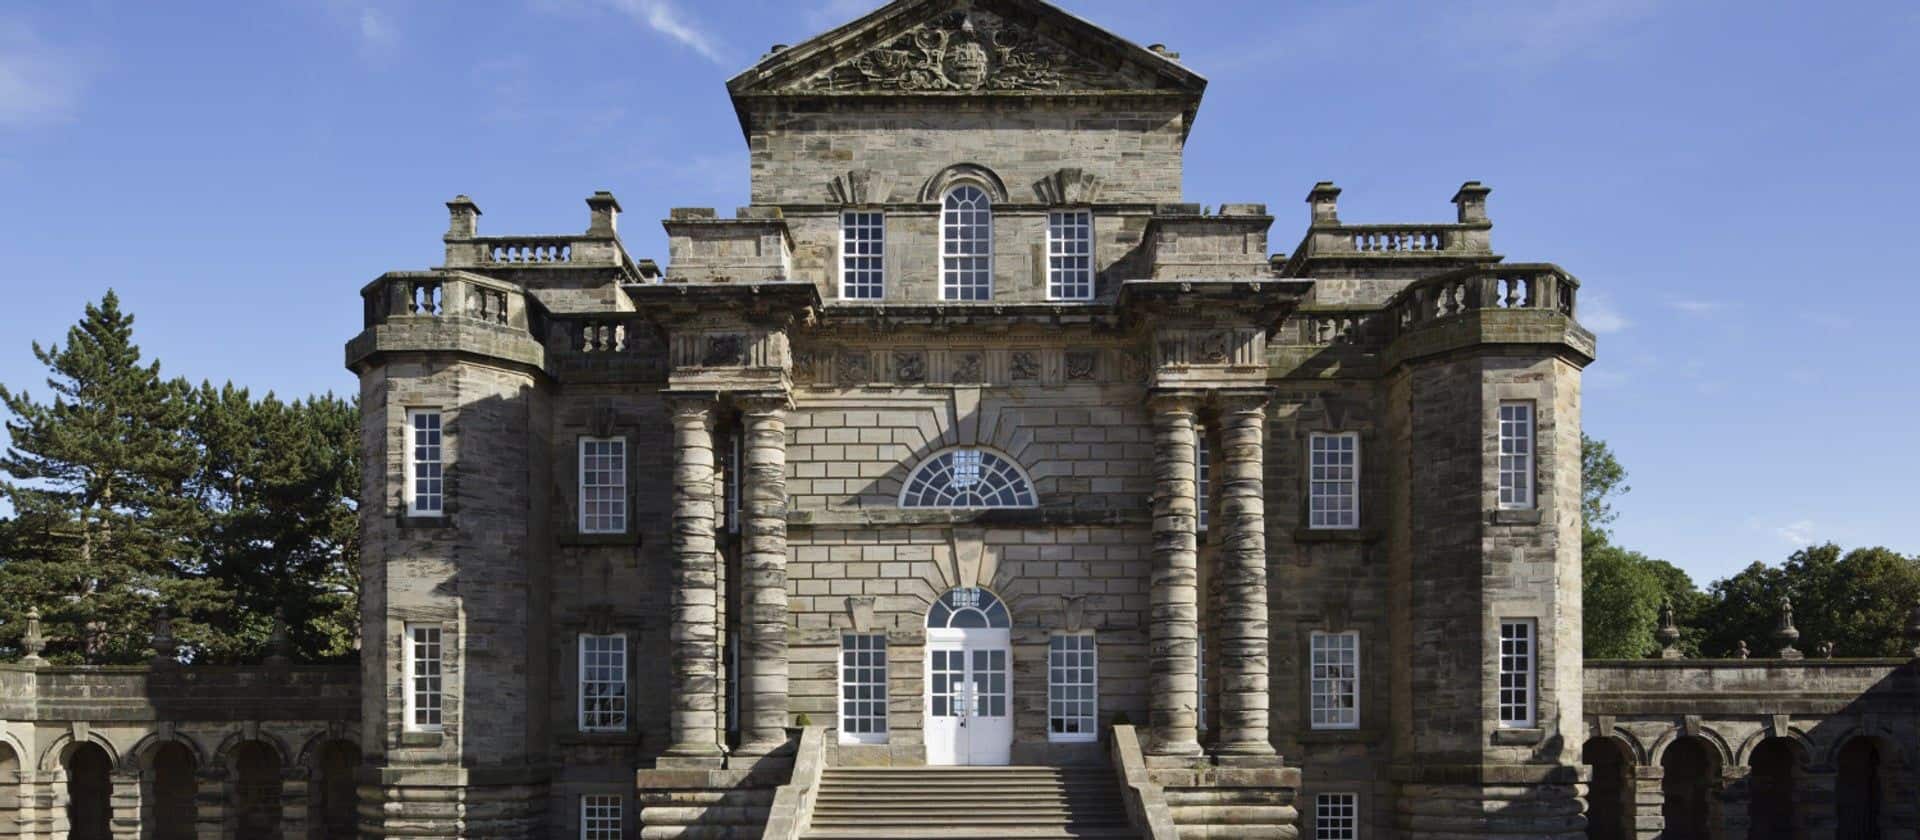 Seaton Delaval Hall in UK